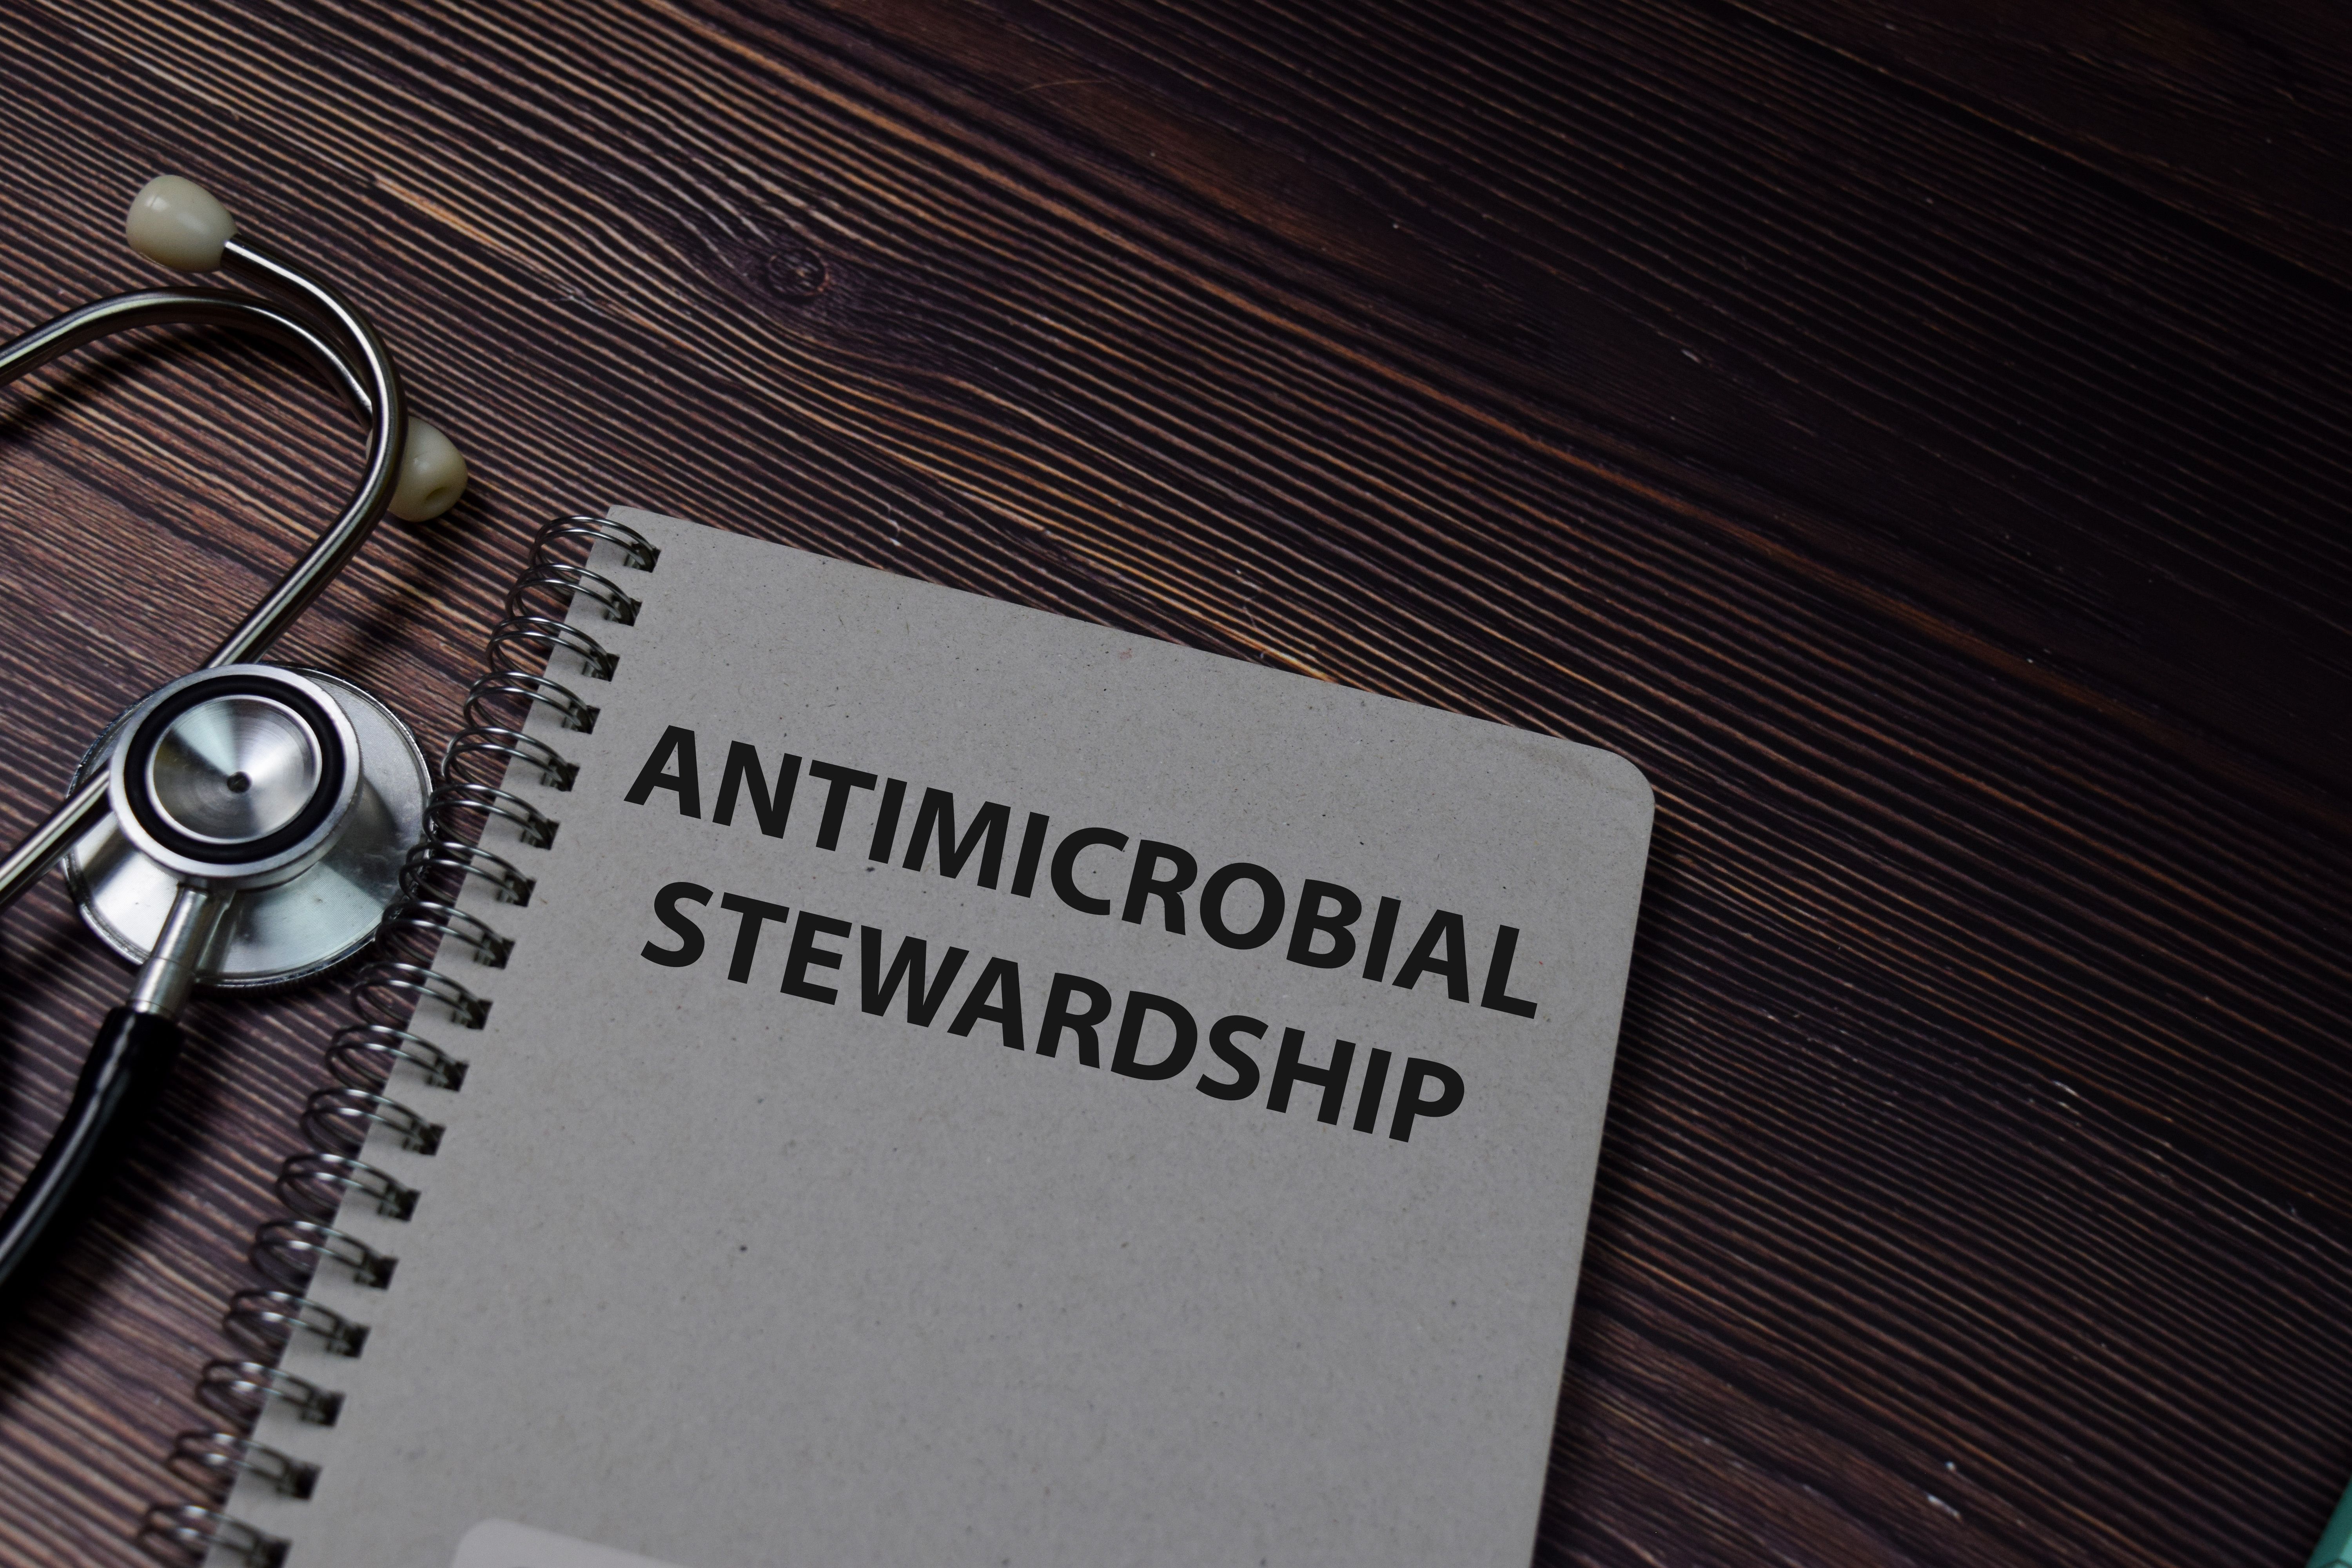 Antimicrobial Stewardship Education Reduces Antibiotic Prescriptions in COVID-19 Patients 